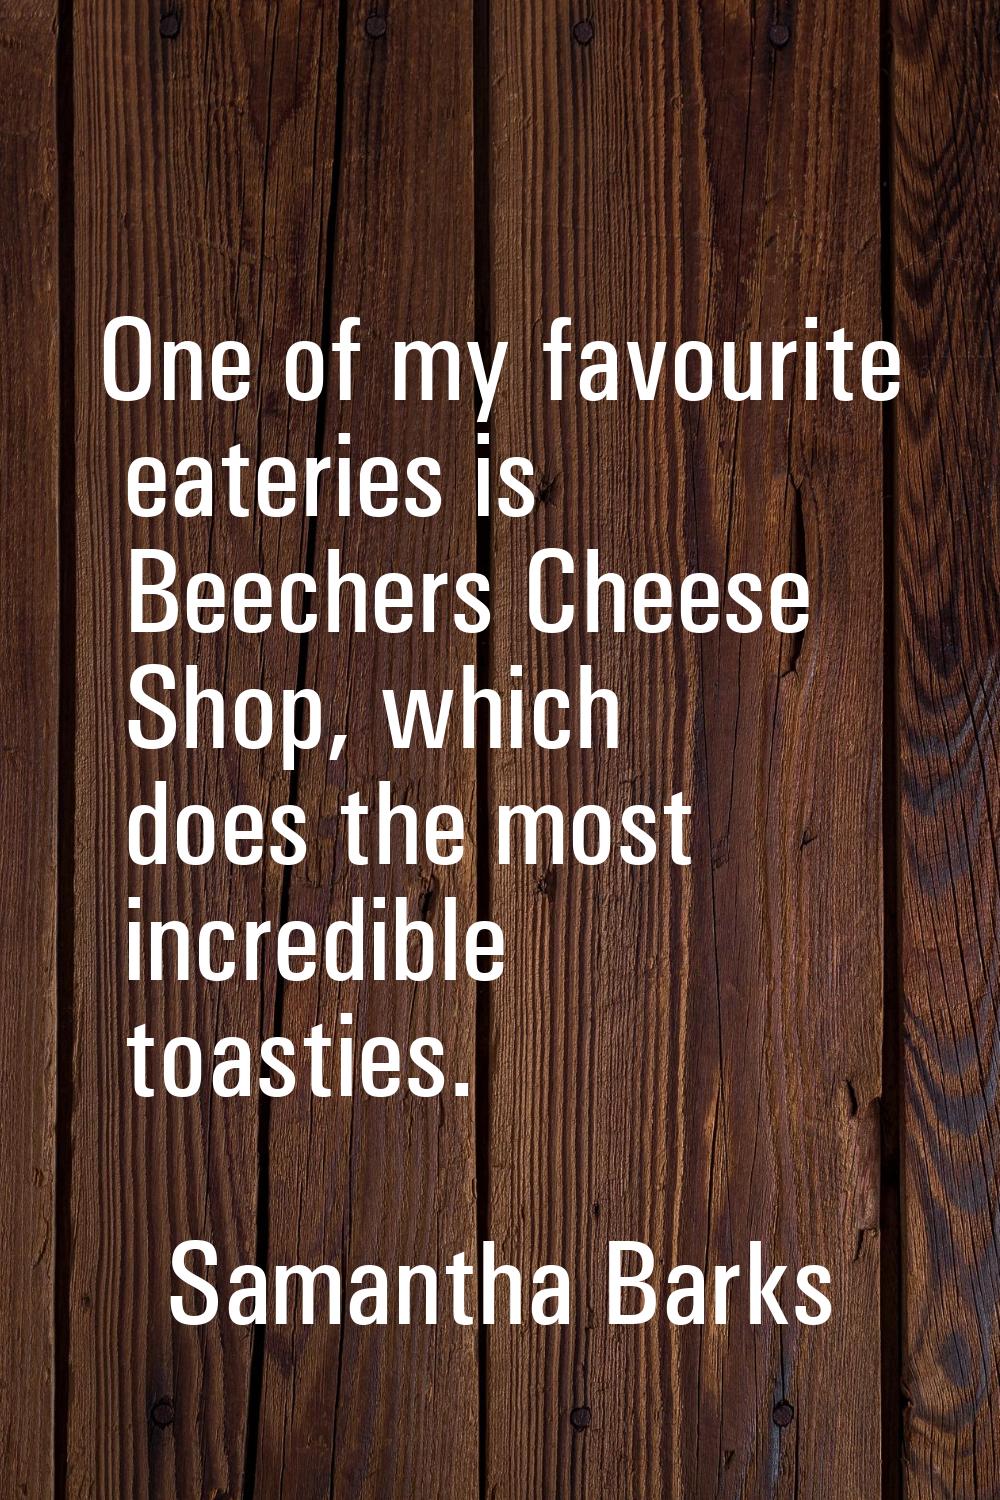 One of my favourite eateries is Beechers Cheese Shop, which does the most incredible toasties.